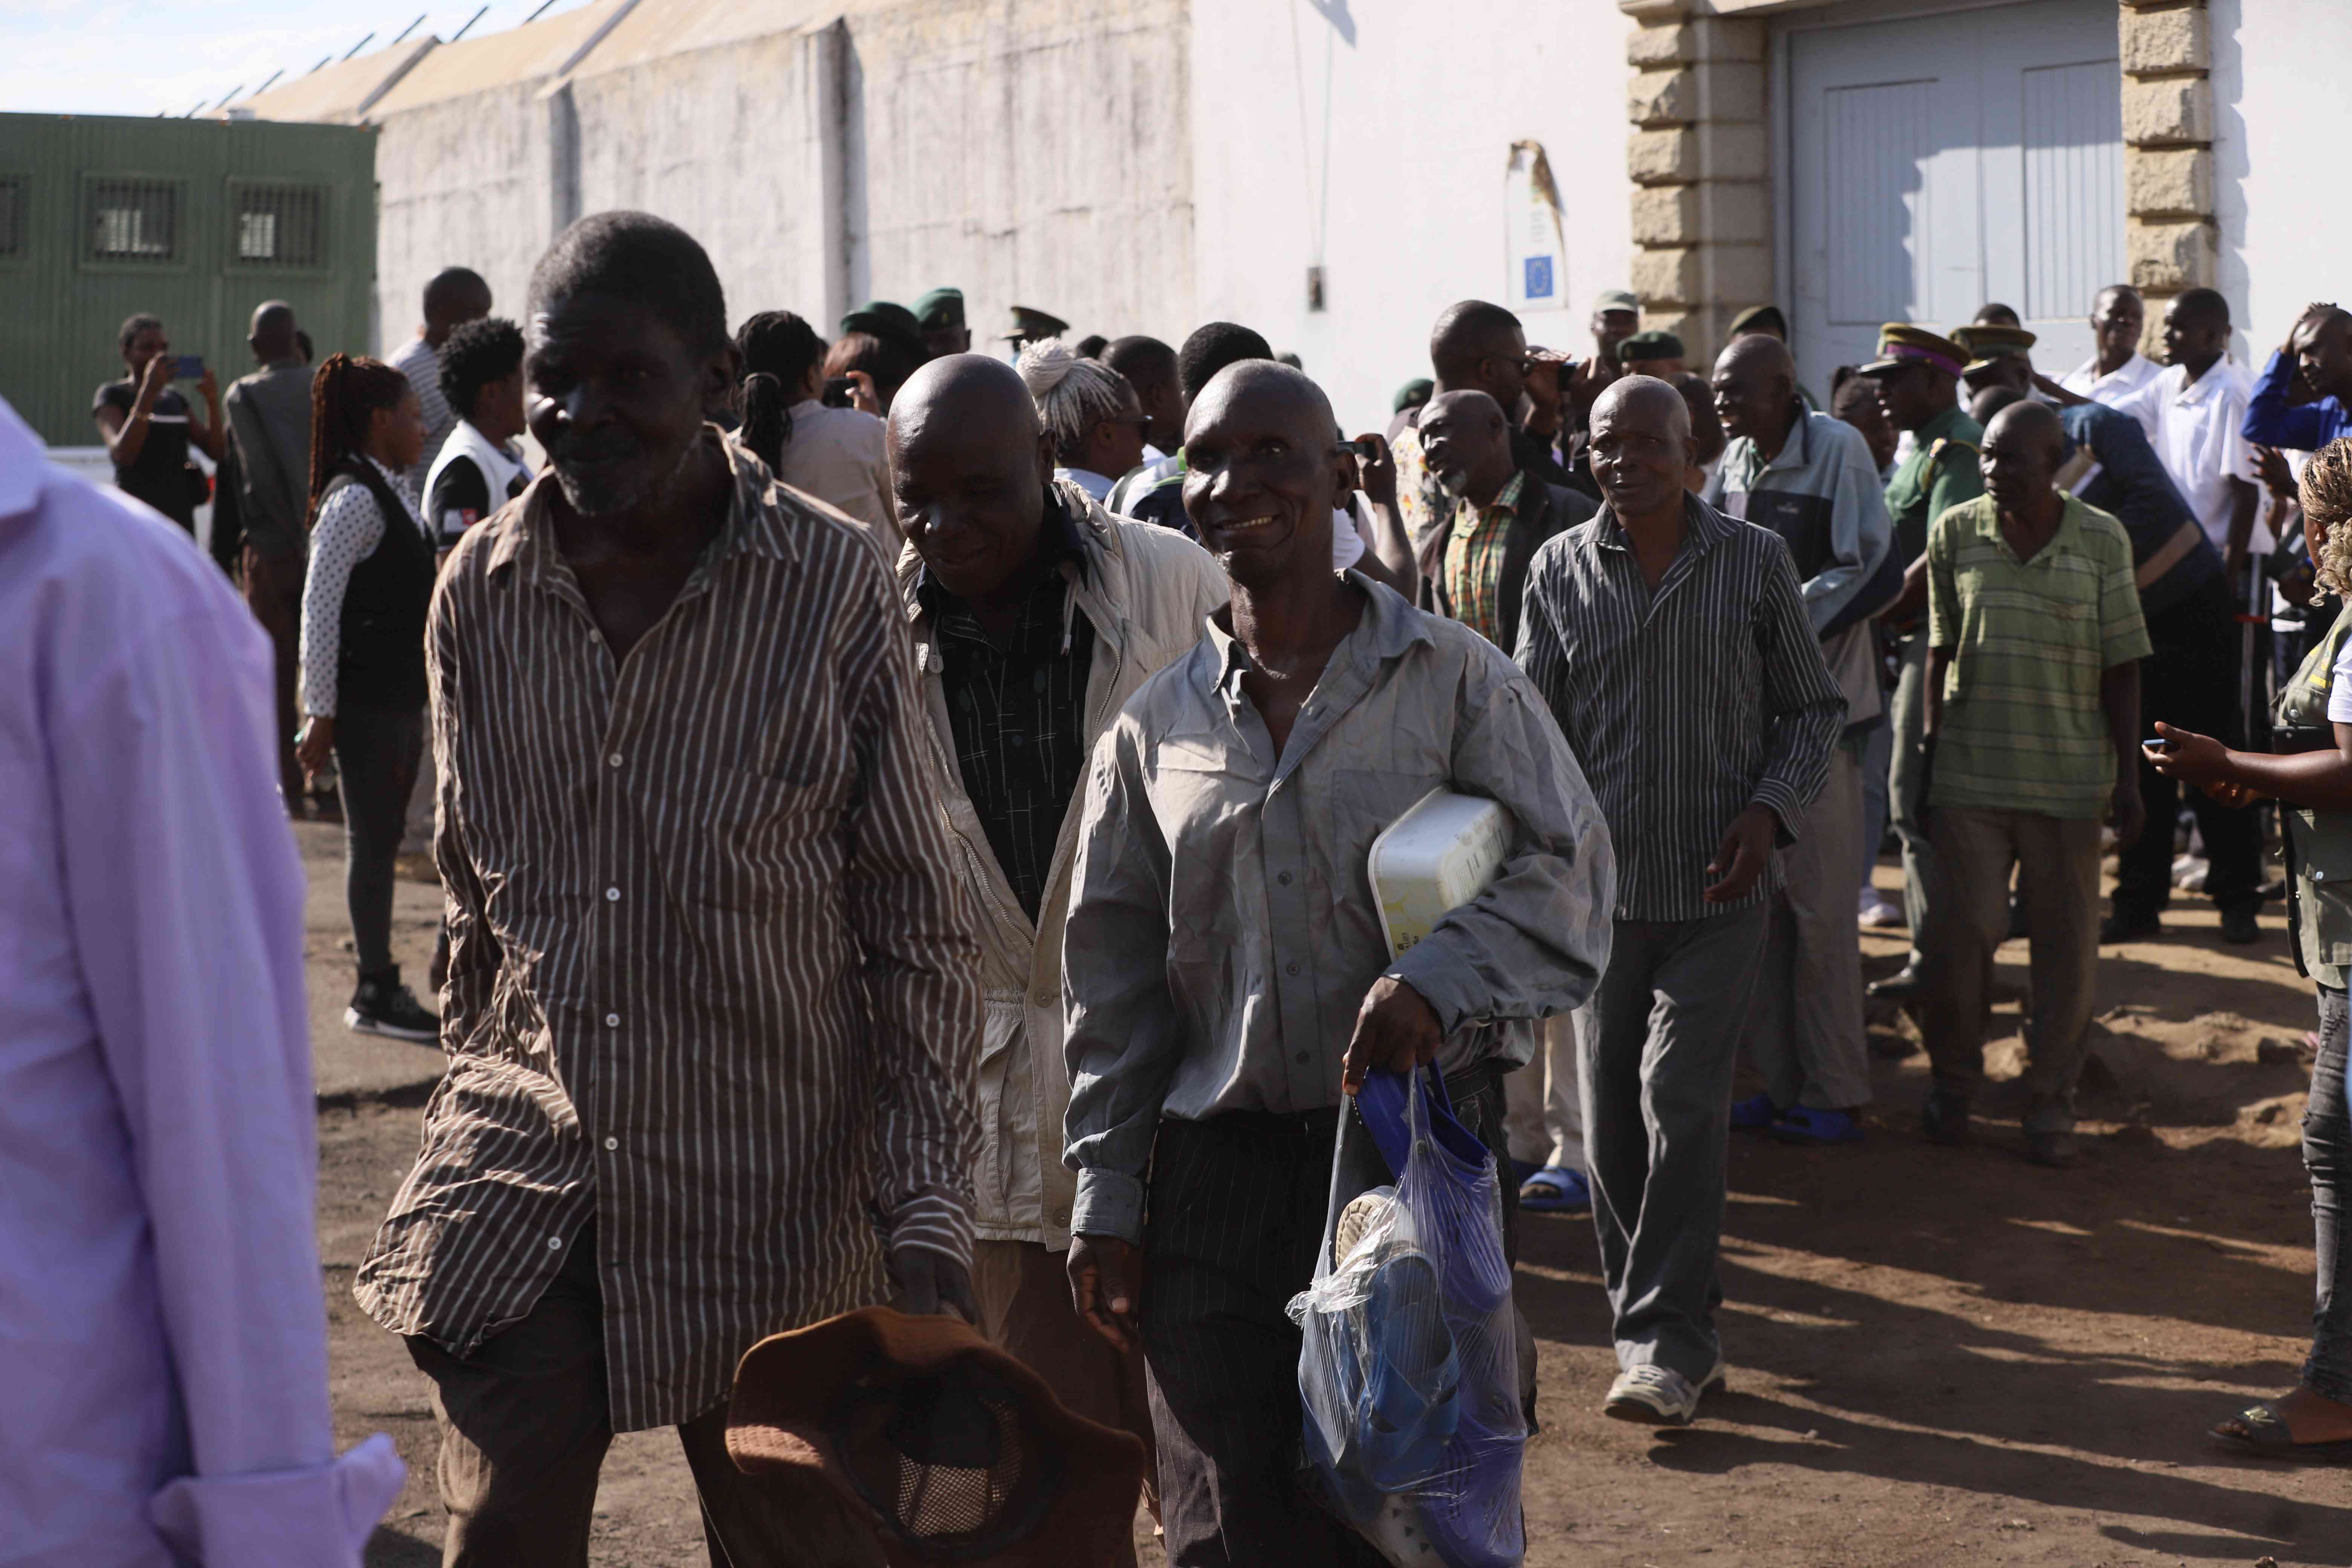 4270 inmates were released from prison through the Presidential amnesty